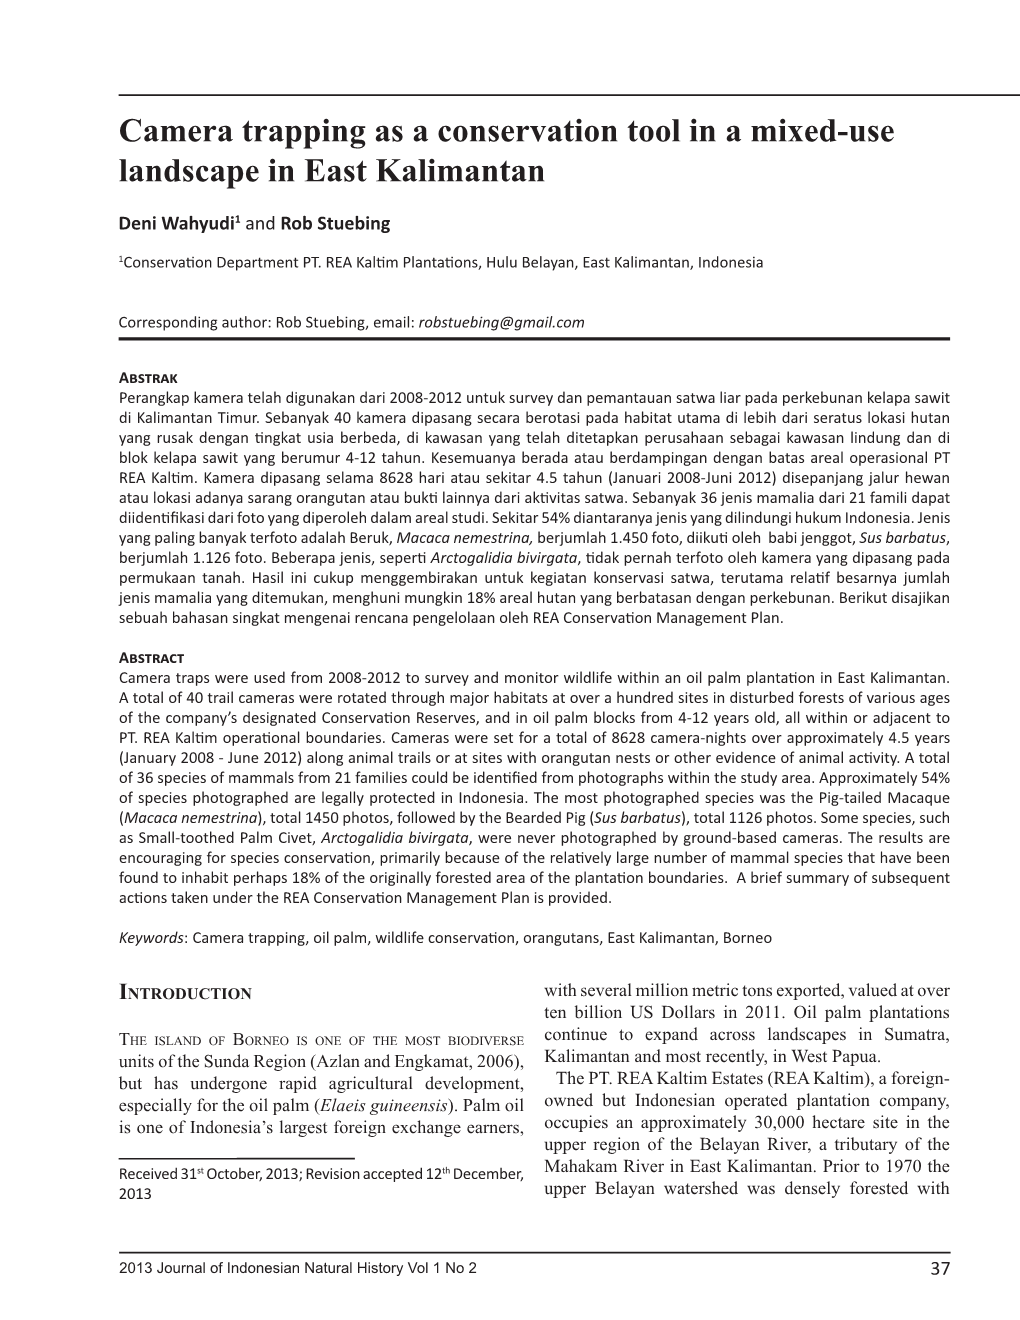 Camera Trapping As a Conservation Tool in a Mixed-Use Landscape in East Kalimantan